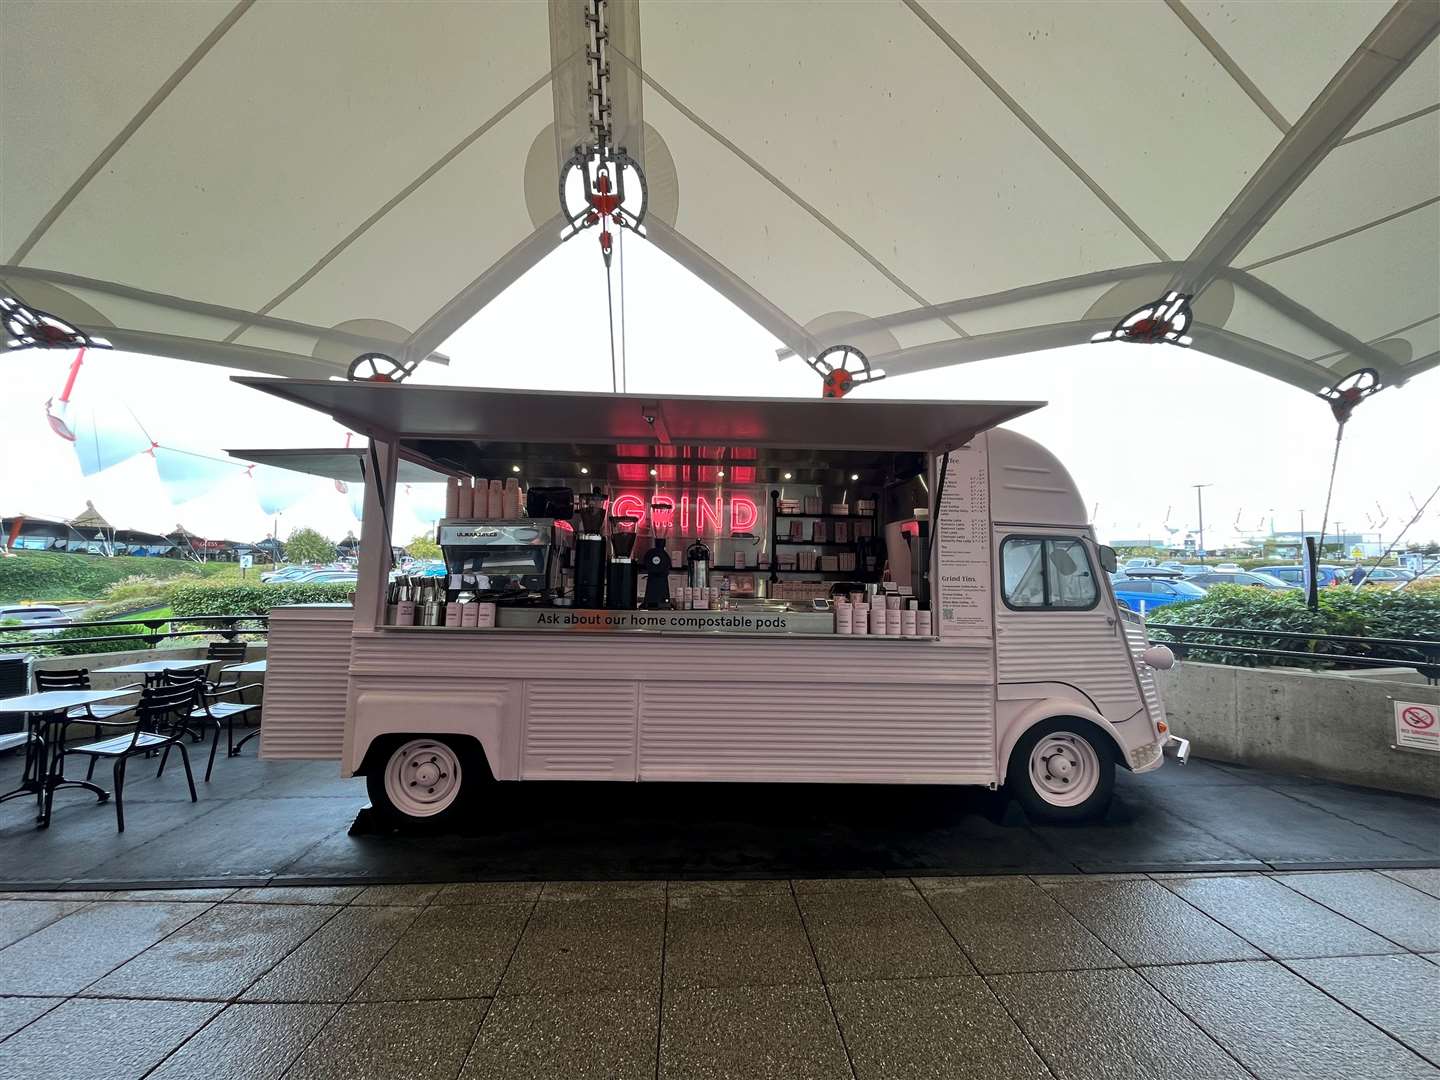 London-based coffee brand Grind Coffee has opened inside a food truck opposite M&S